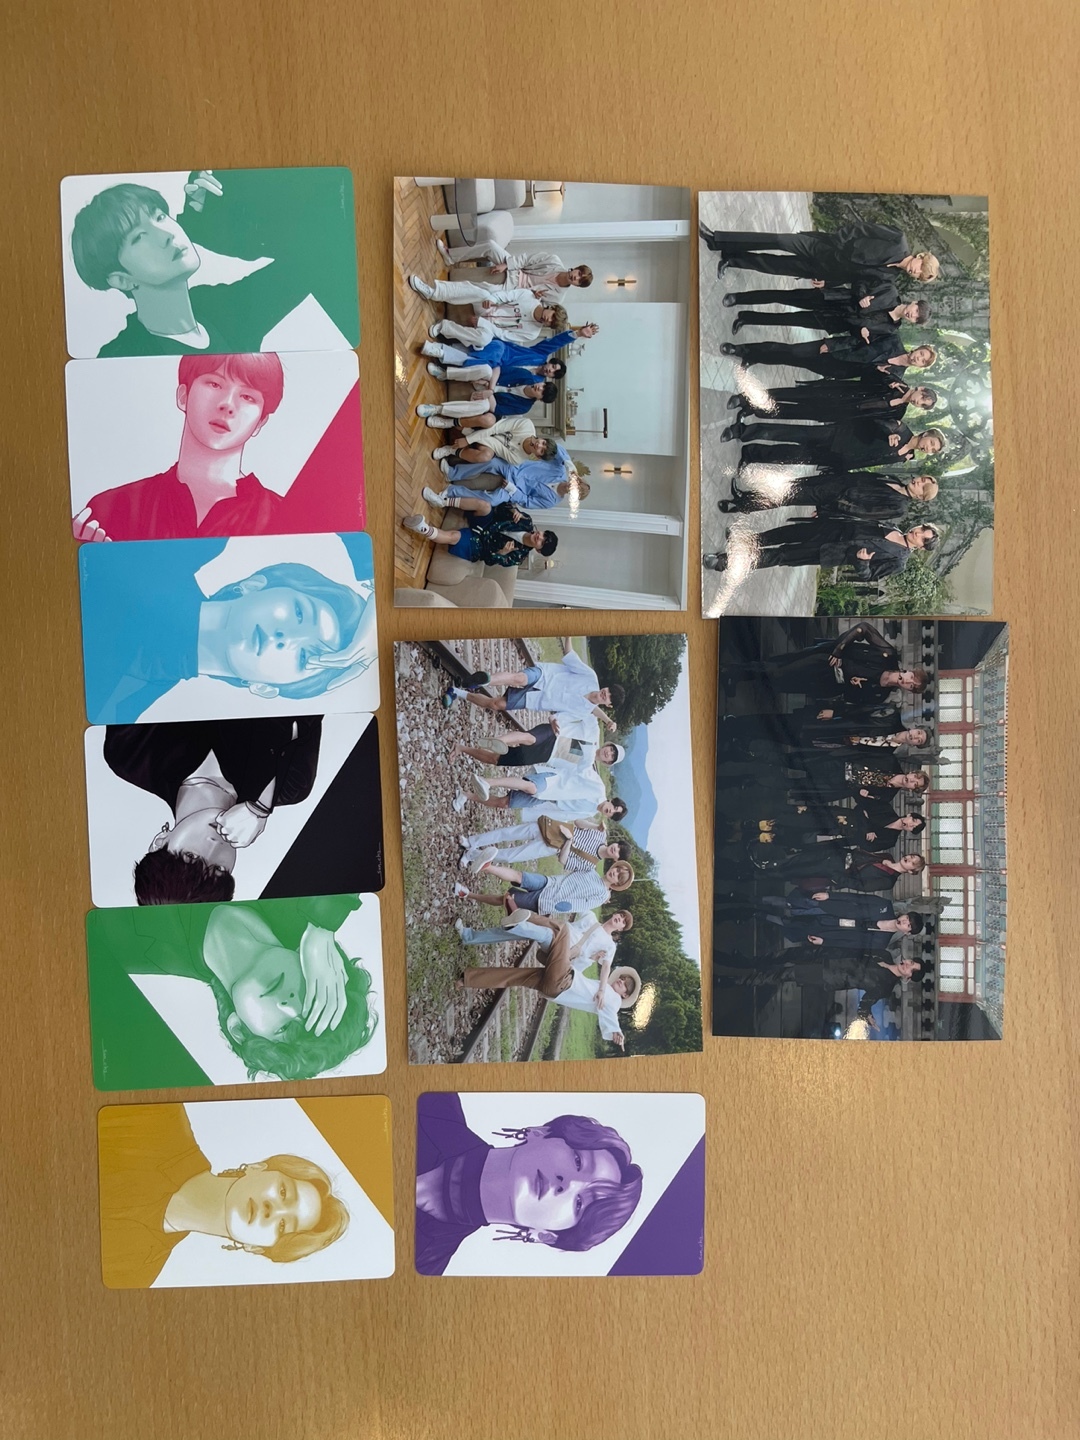 Photo cards and hand-printed pictures of boy band BTS are displayed on the table. (Kweon Ha-bin/The Korea Herald)